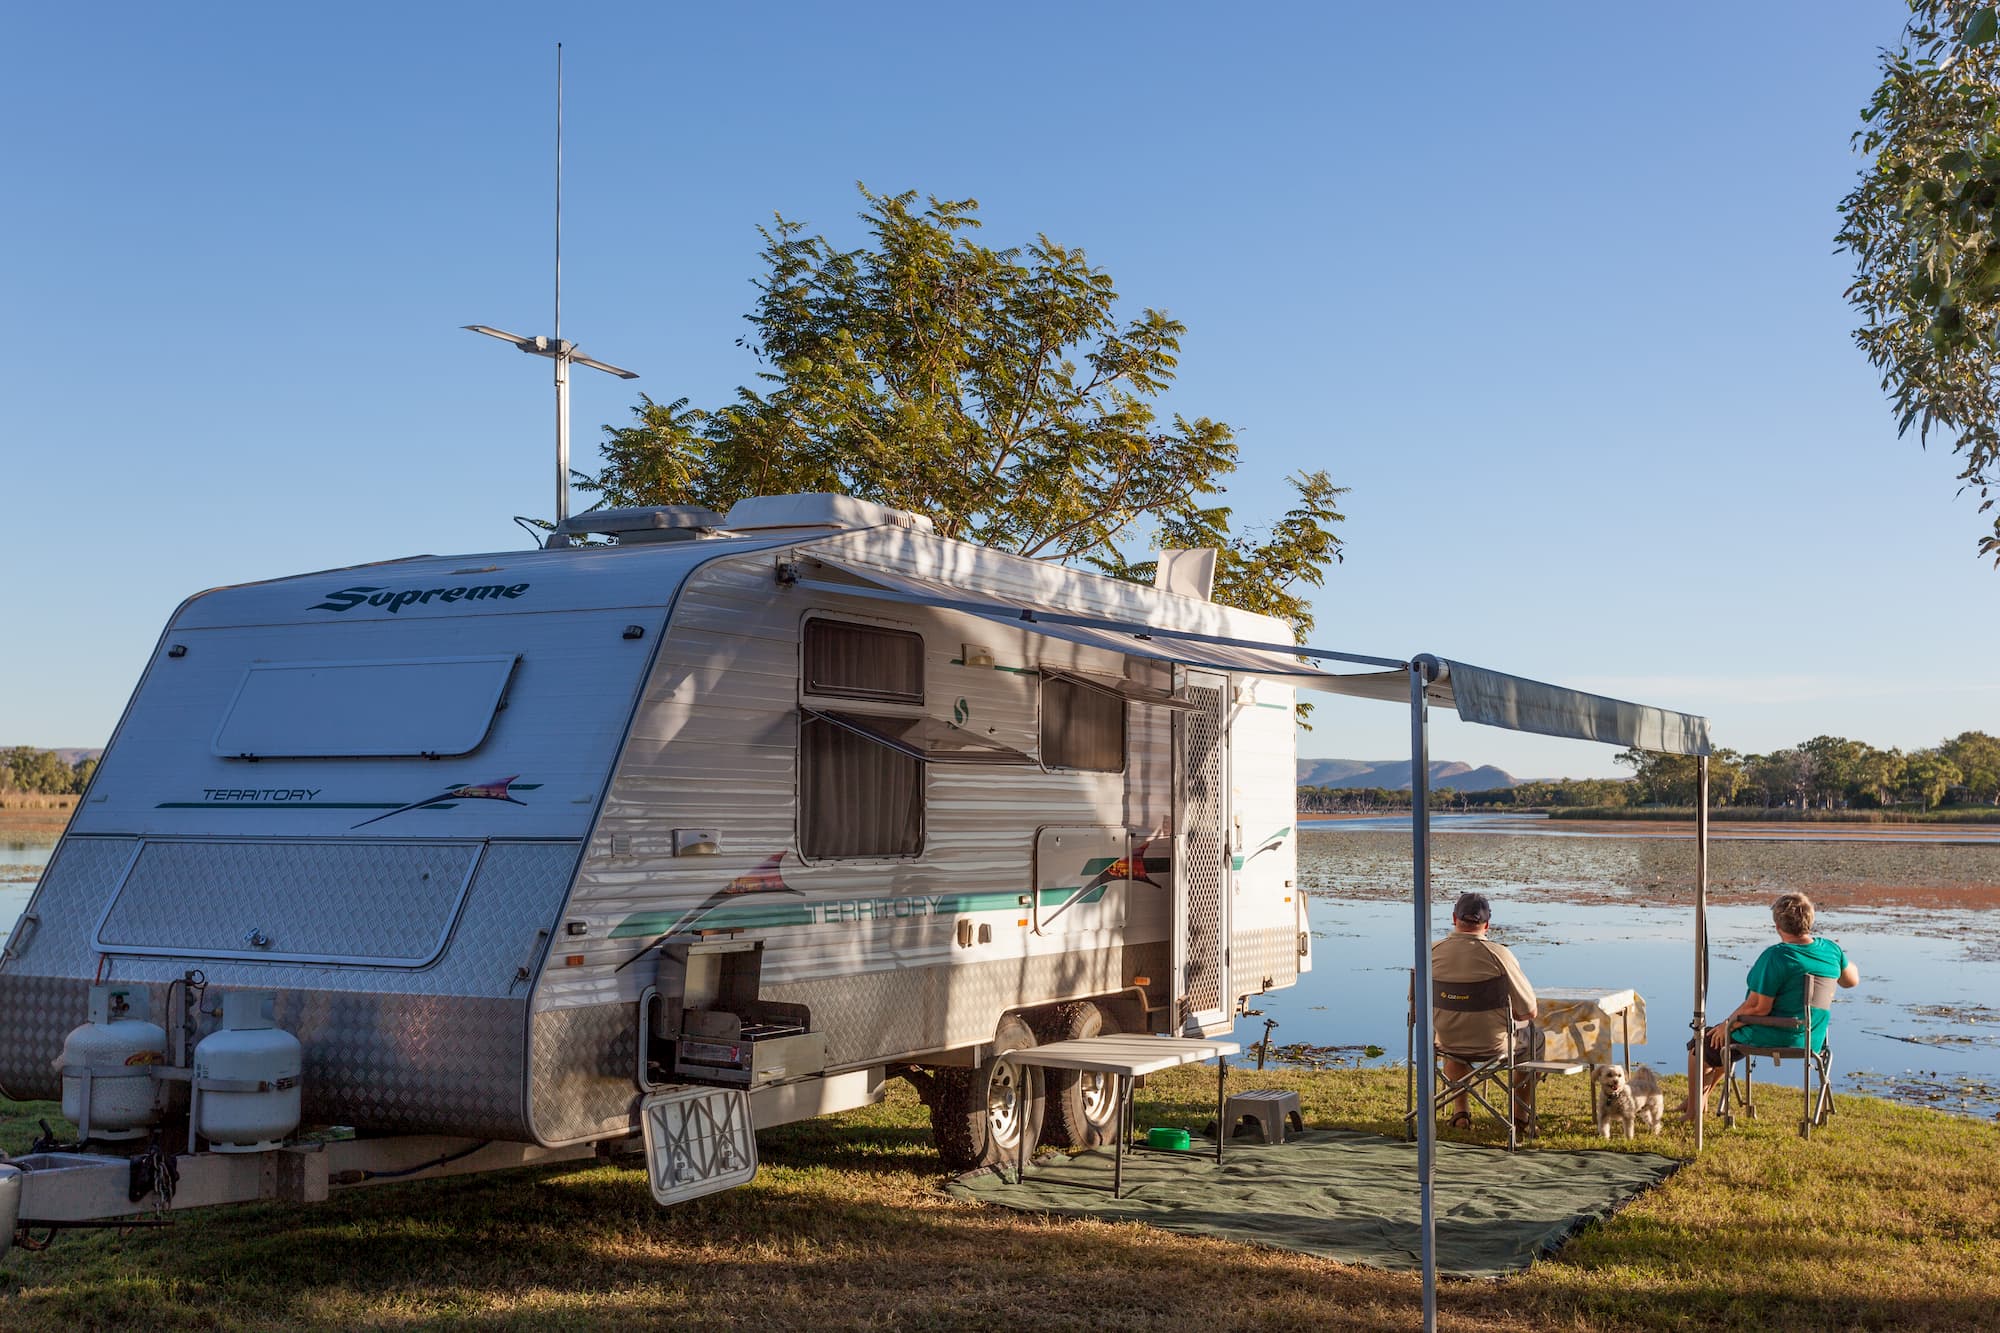 an elderly couple relaxing next to their RV camper near a lake